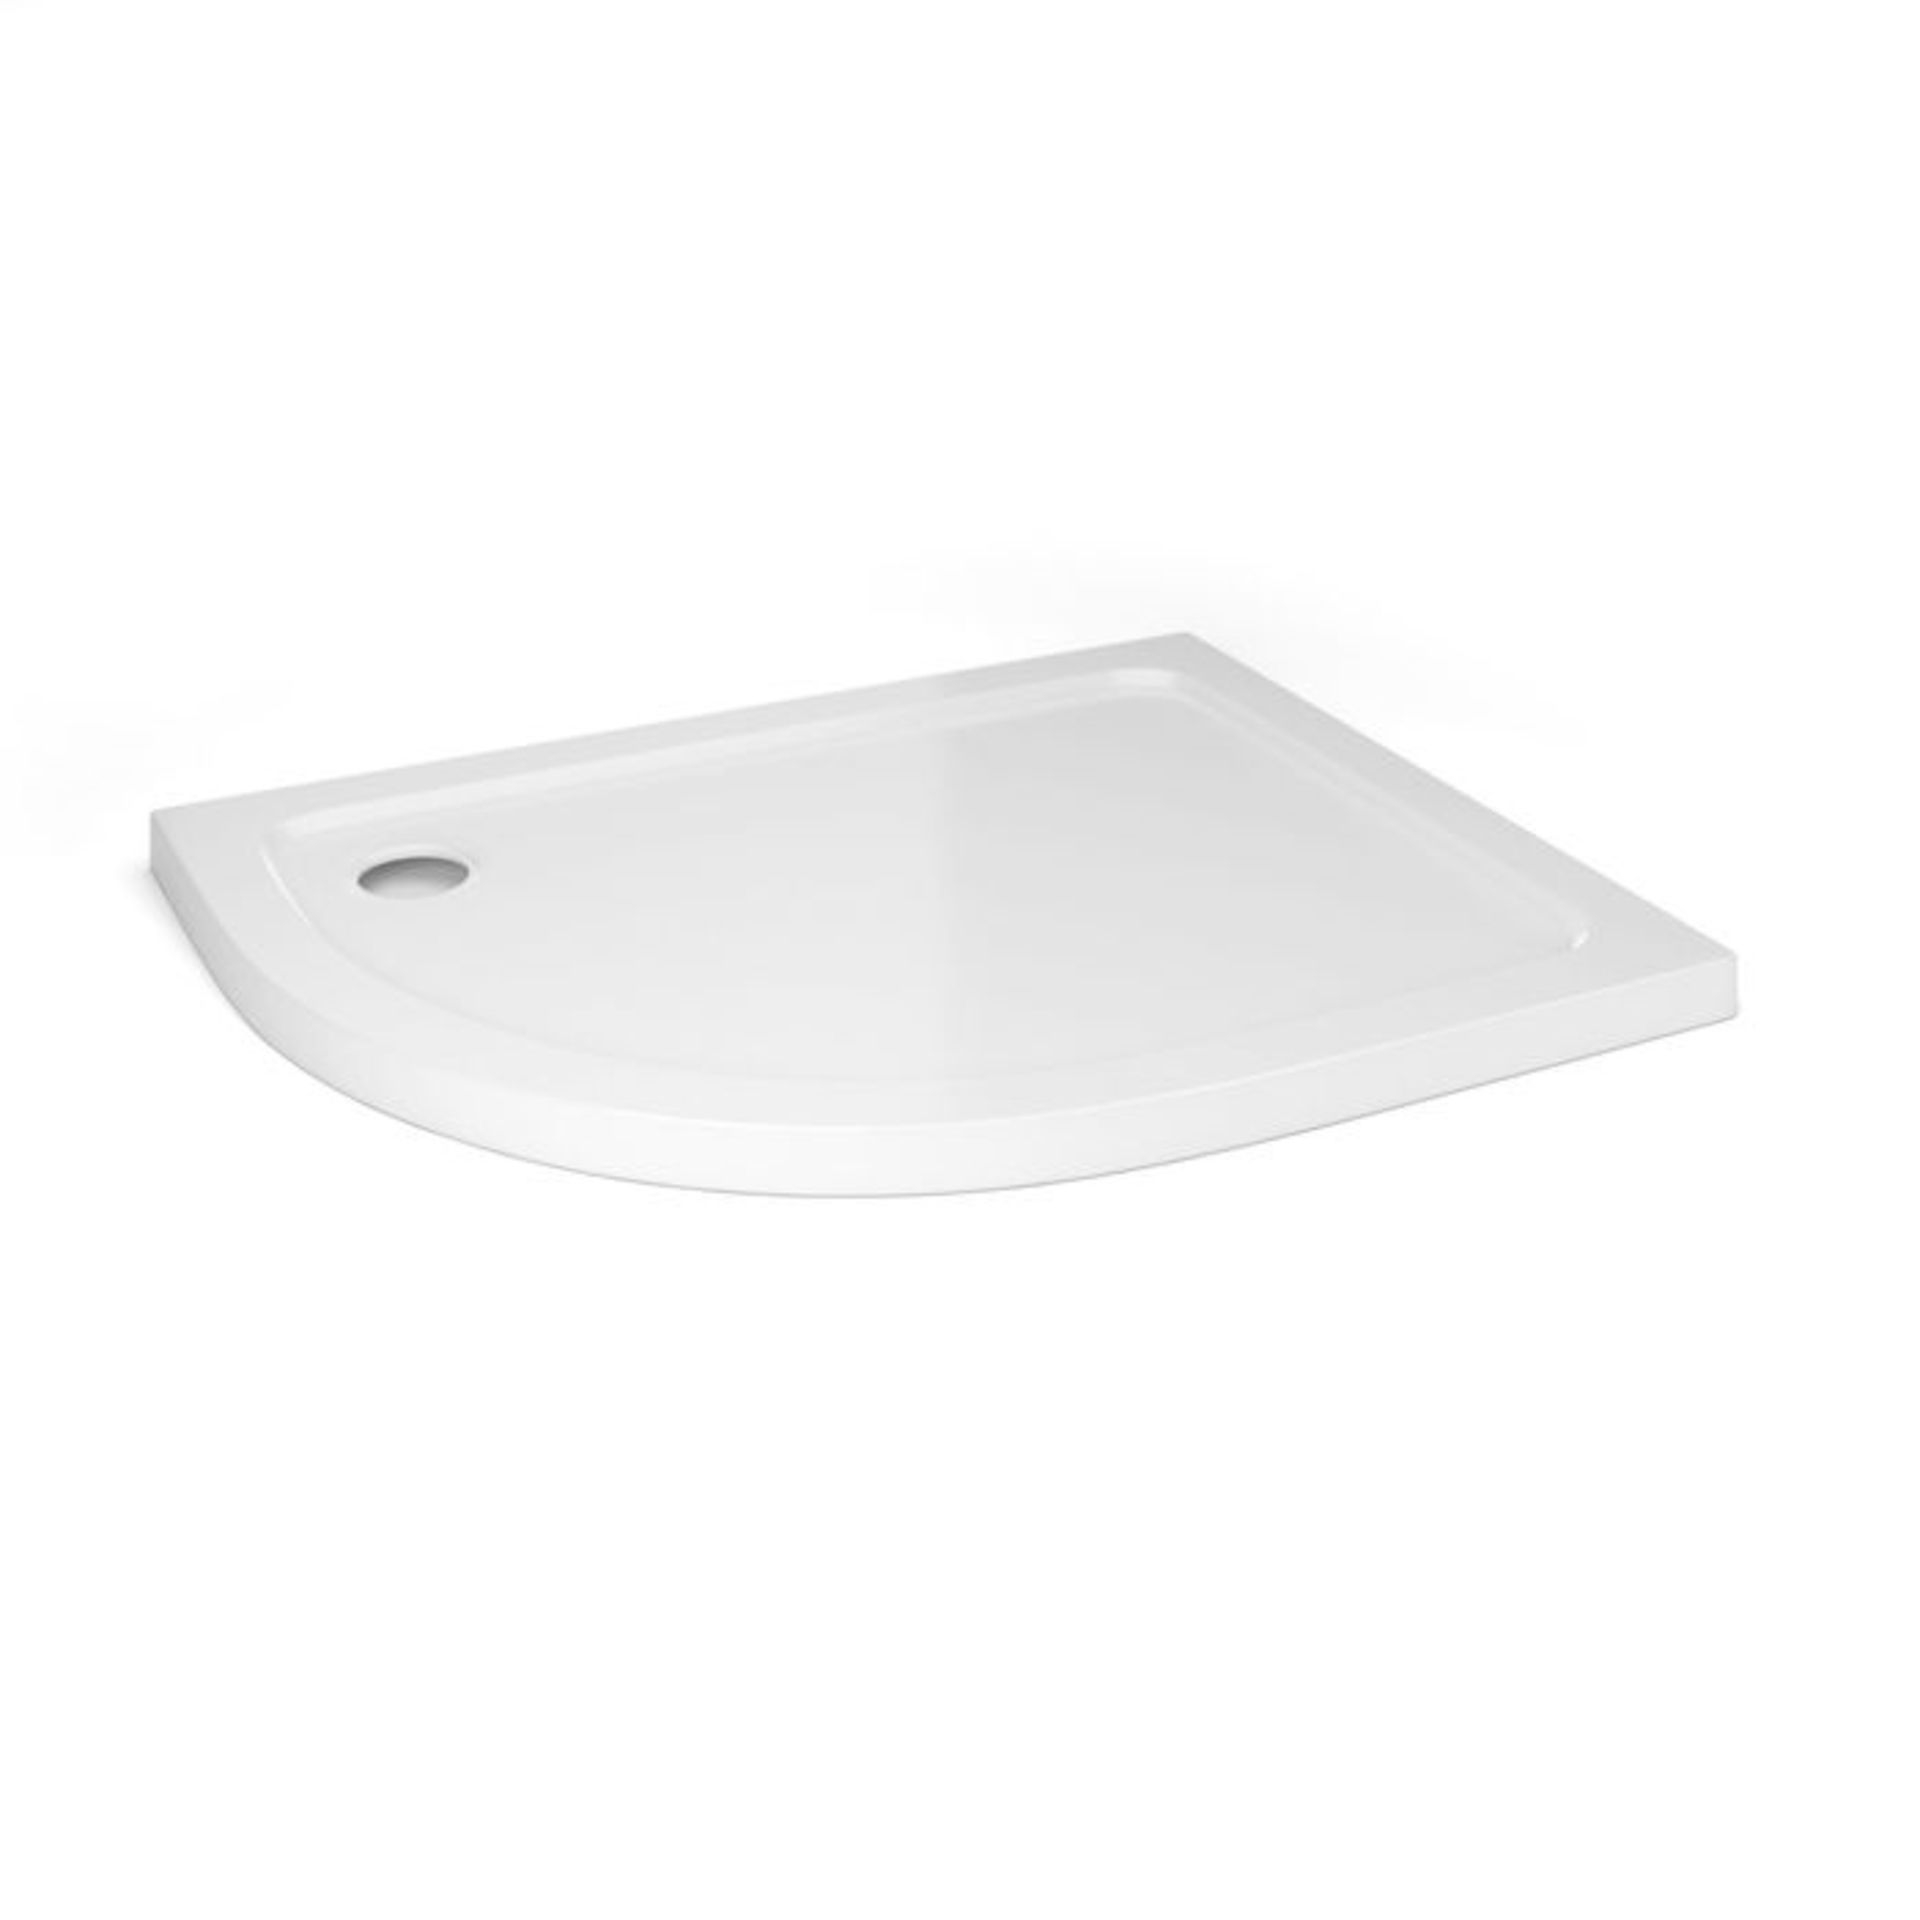 (MW196) 1000x800mm Offset Quadrant Ultra Slim Stone Shower Tray - Left. Constructed from acryli... - Image 2 of 2